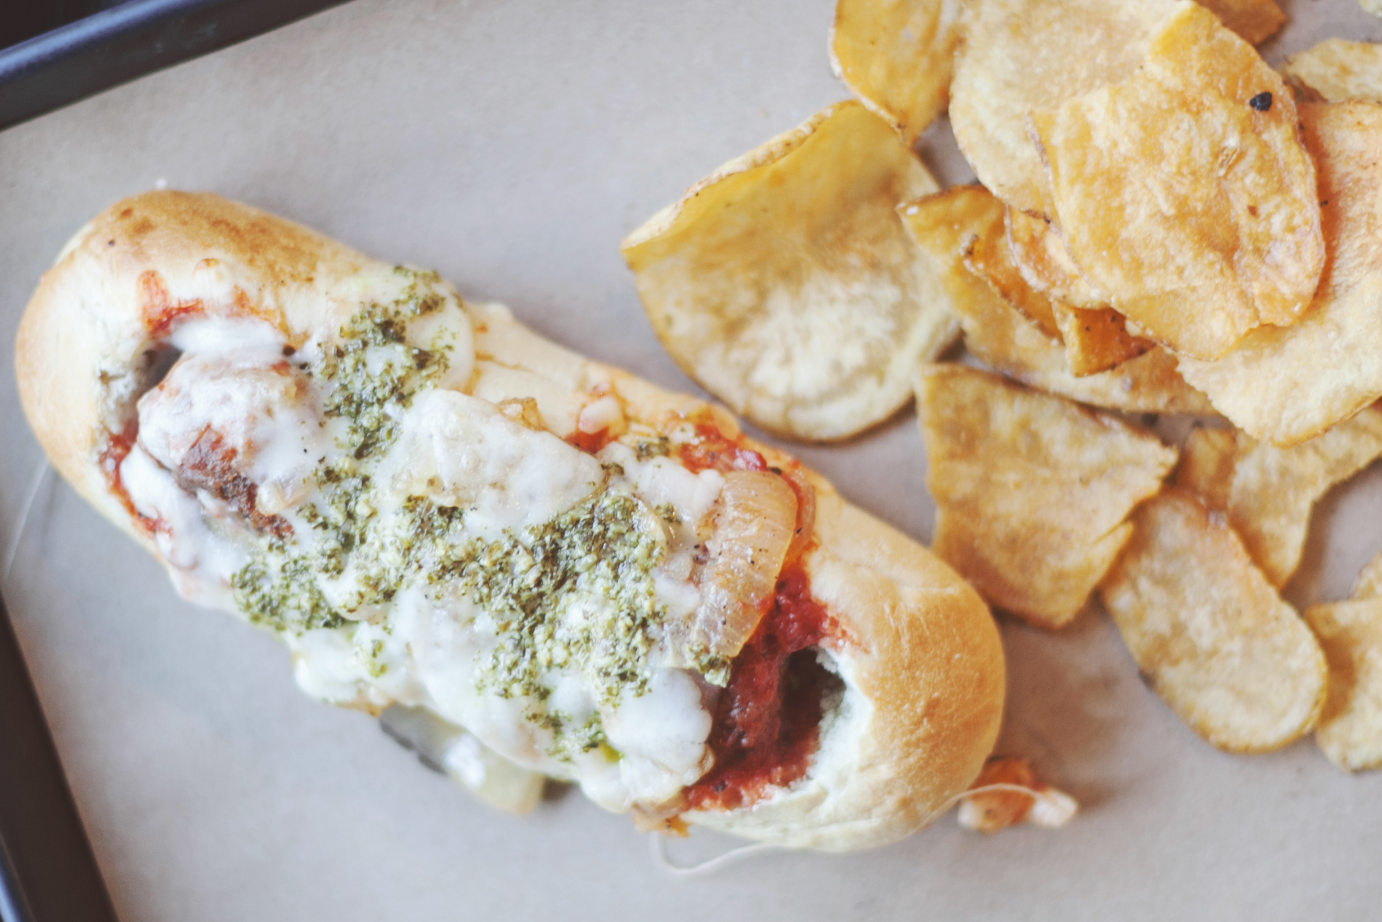 Meatball sub with chips